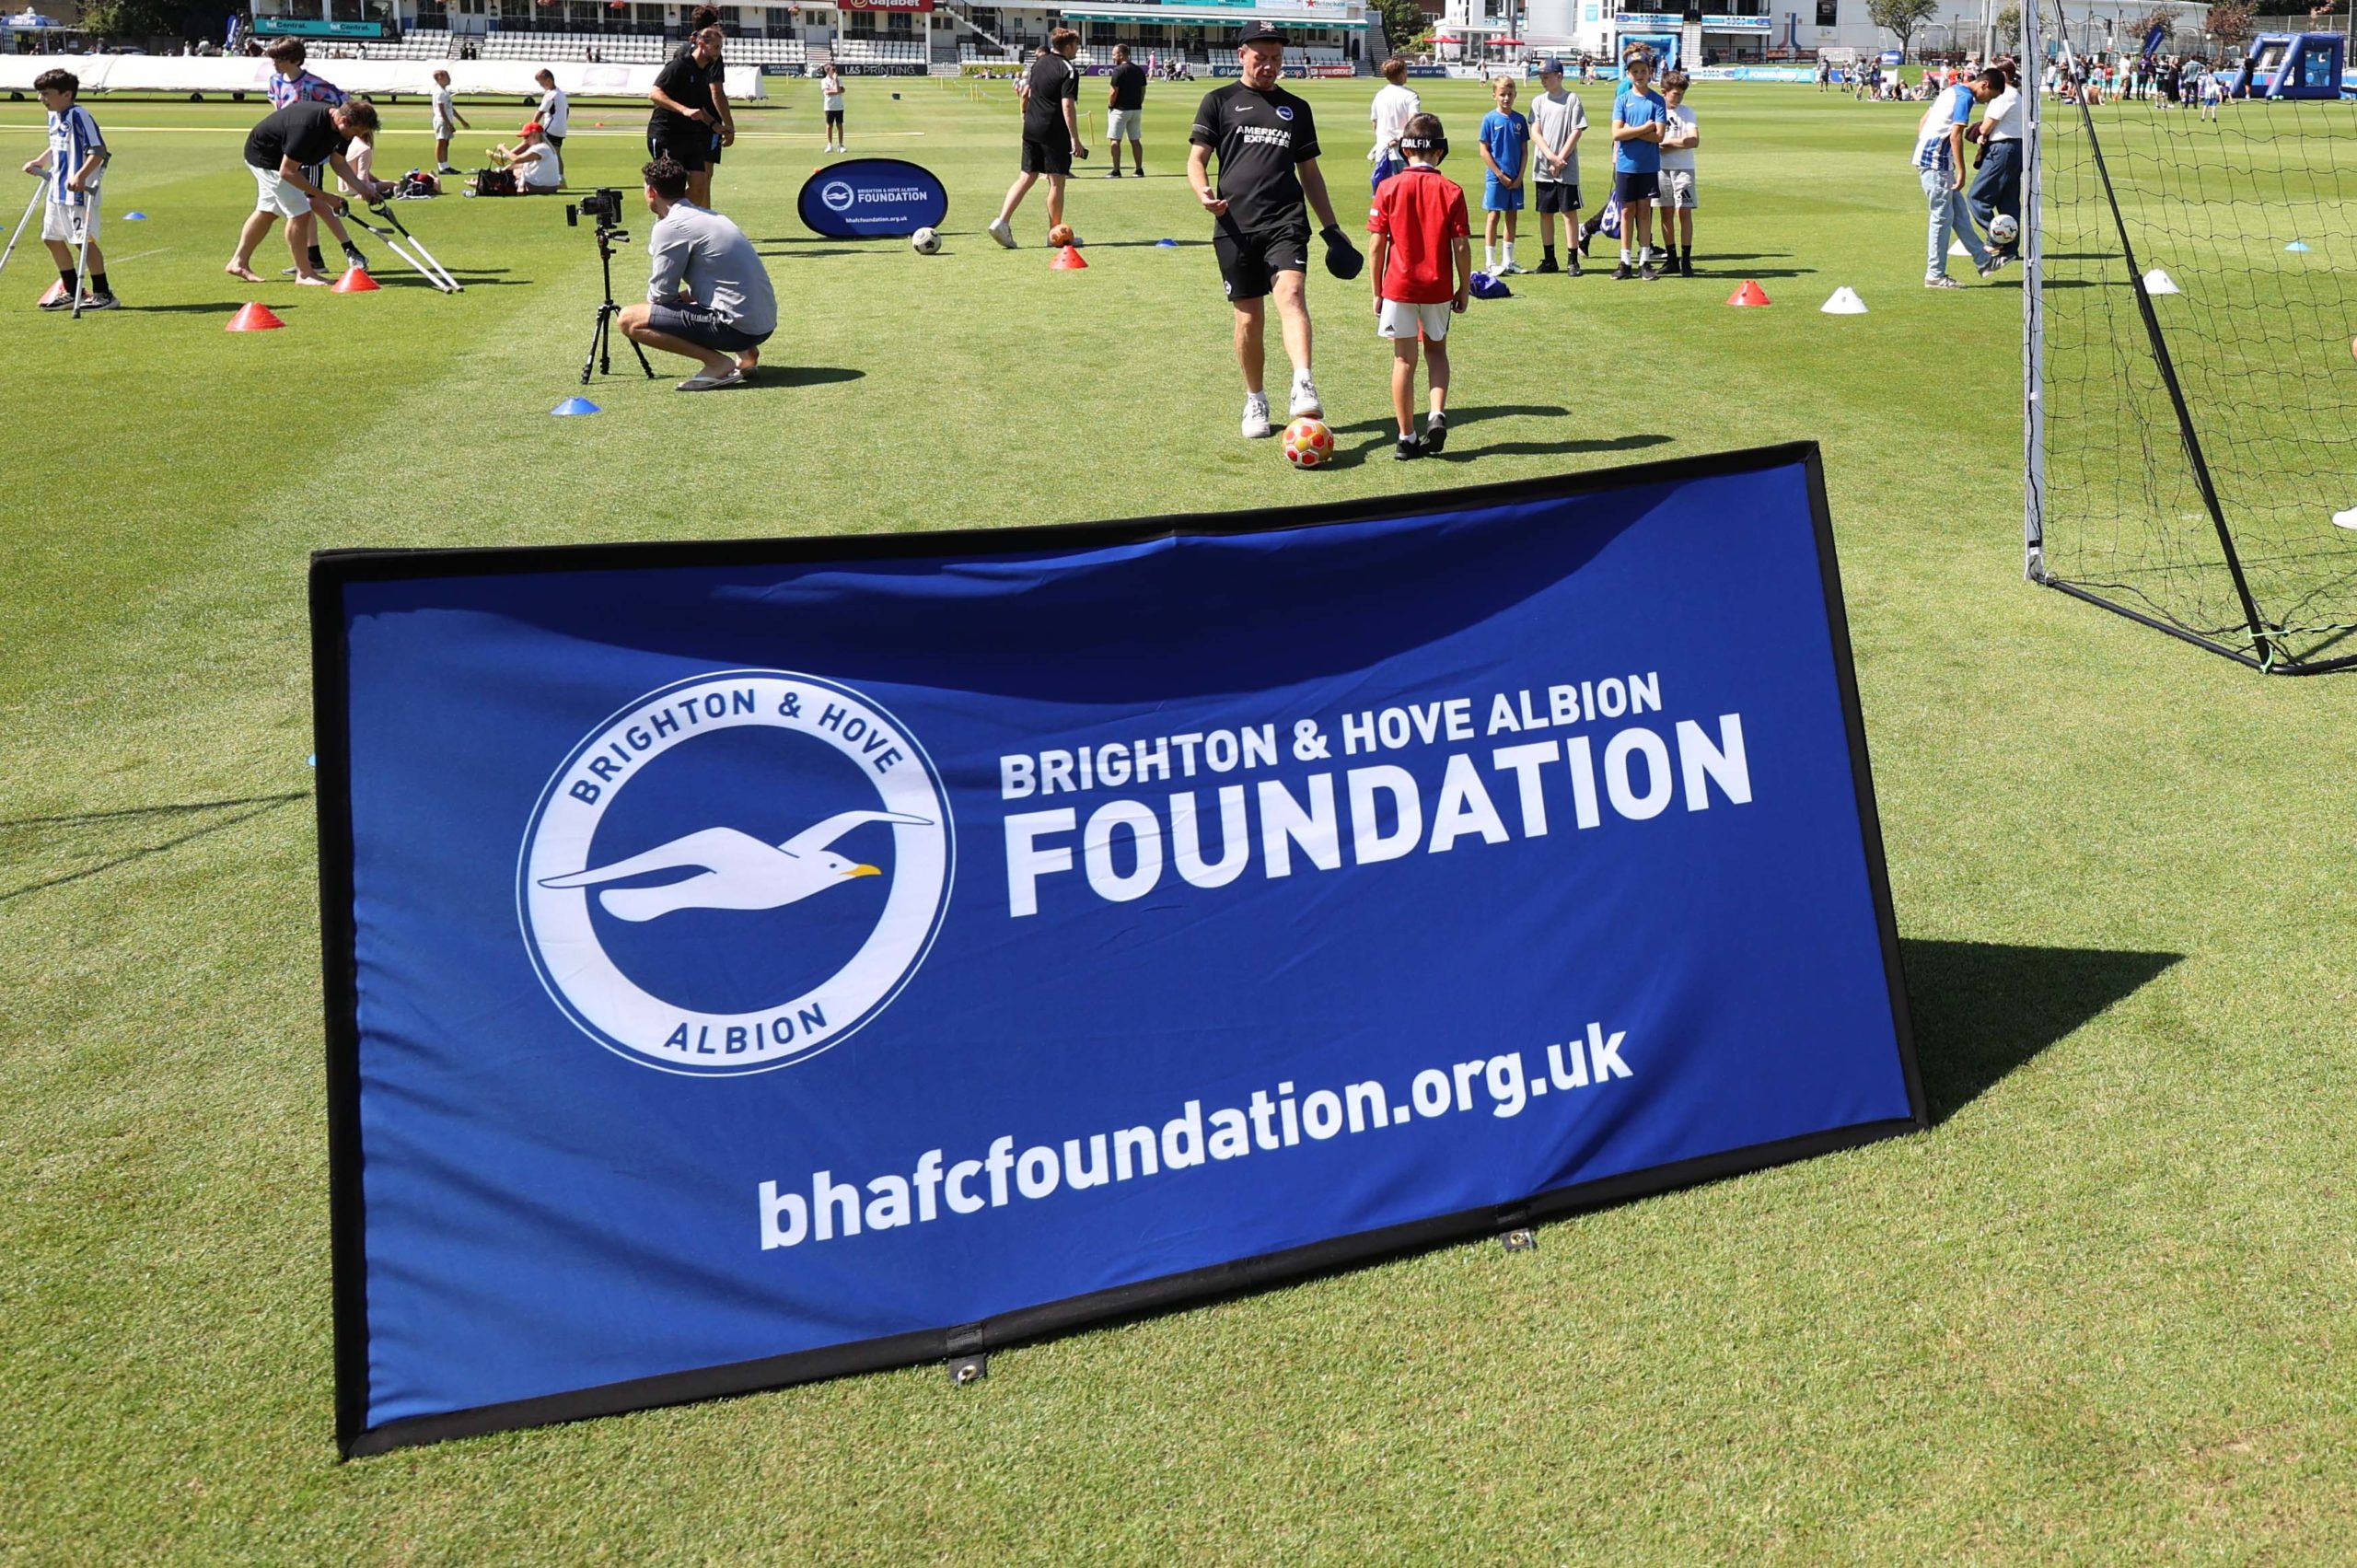 Looking back on an exciting summer at BHAFC Foundation